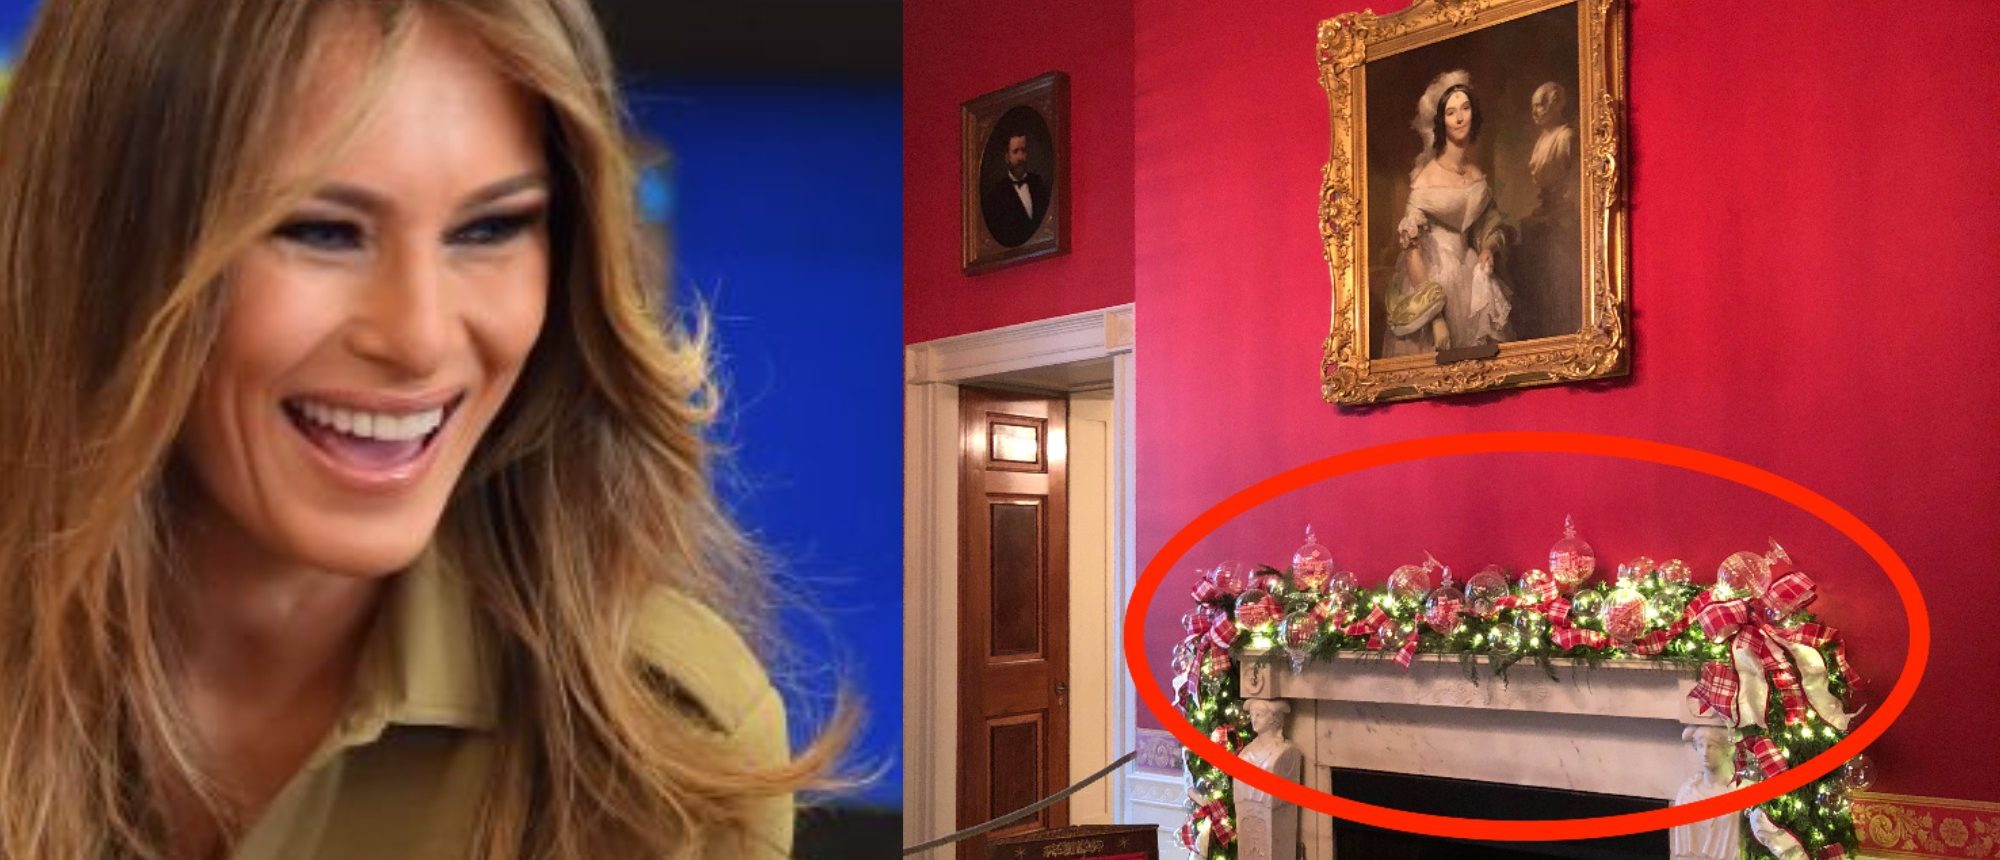 Melania Trump Hid A Secret Troll To Michelle Obama In Her White House Decorations ...2000 x 860